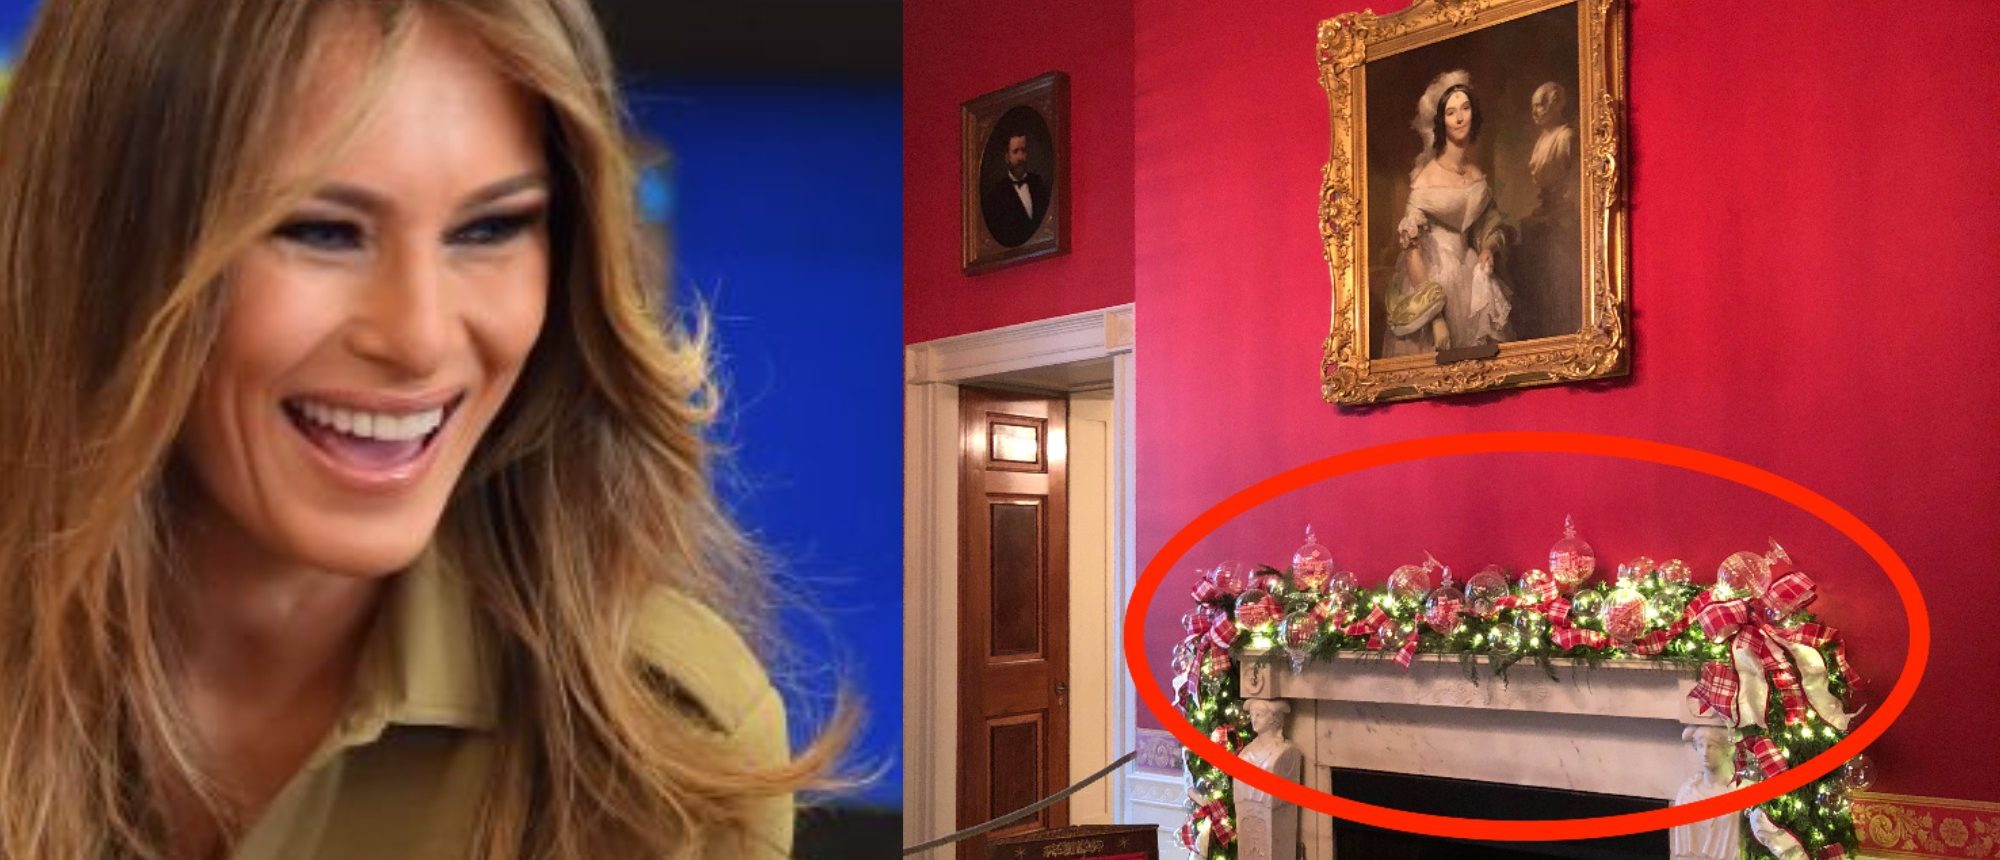 Melania Trump Hid A Secret Troll To Michelle Obama In Her White House Decorations ...2000 x 860